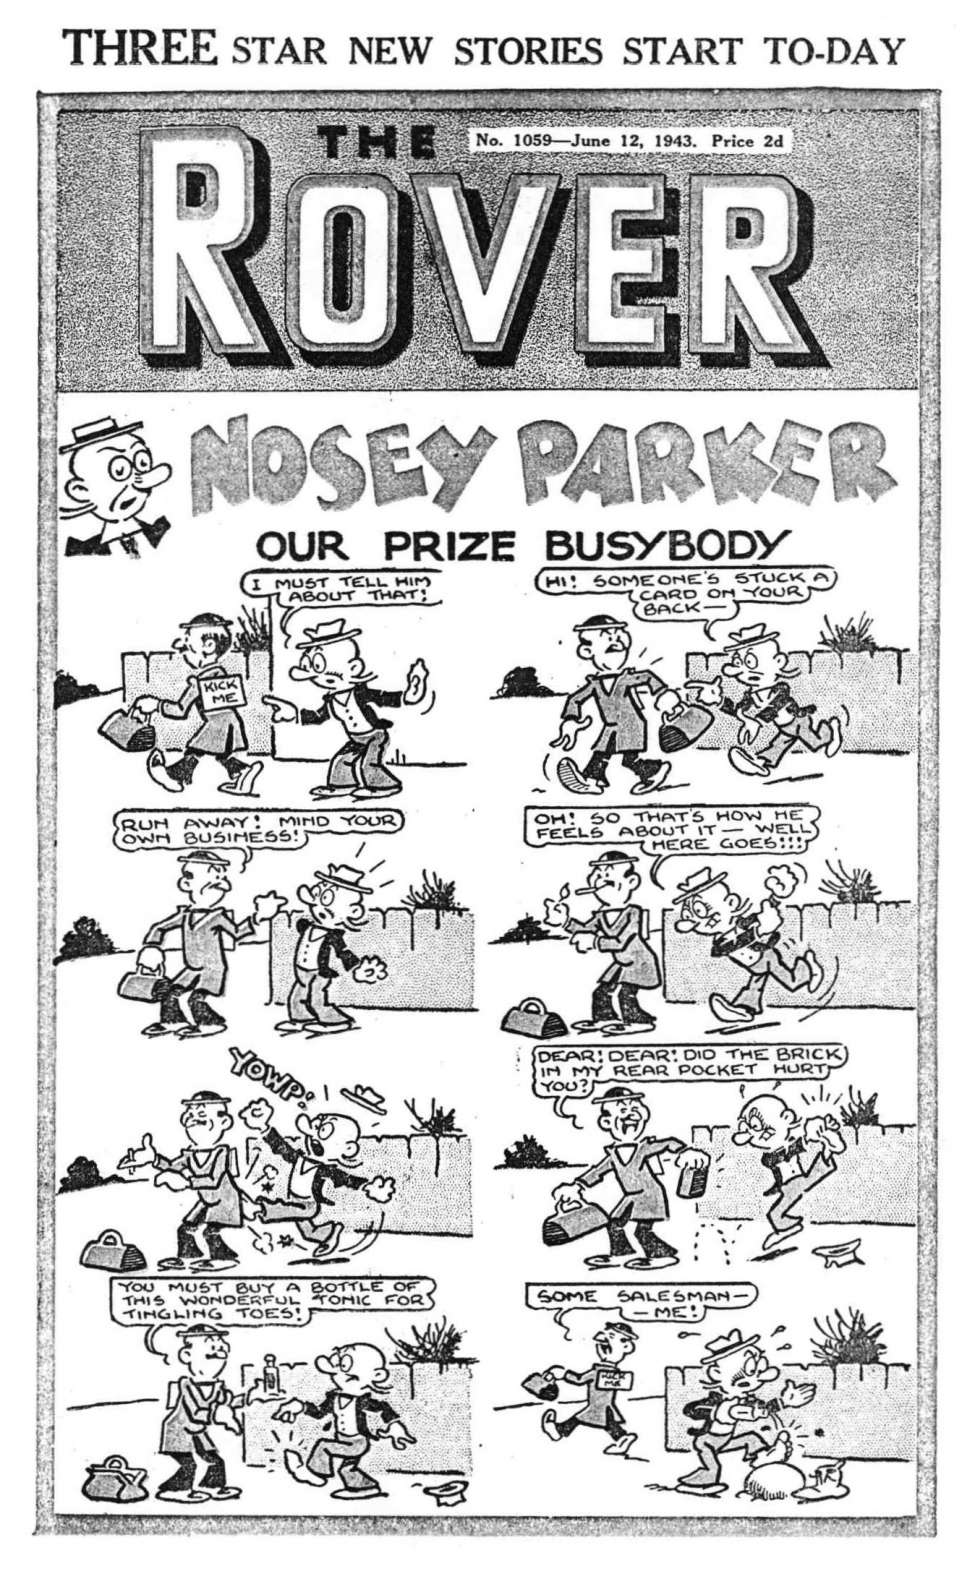 Comic Book Cover For The Rover 1059